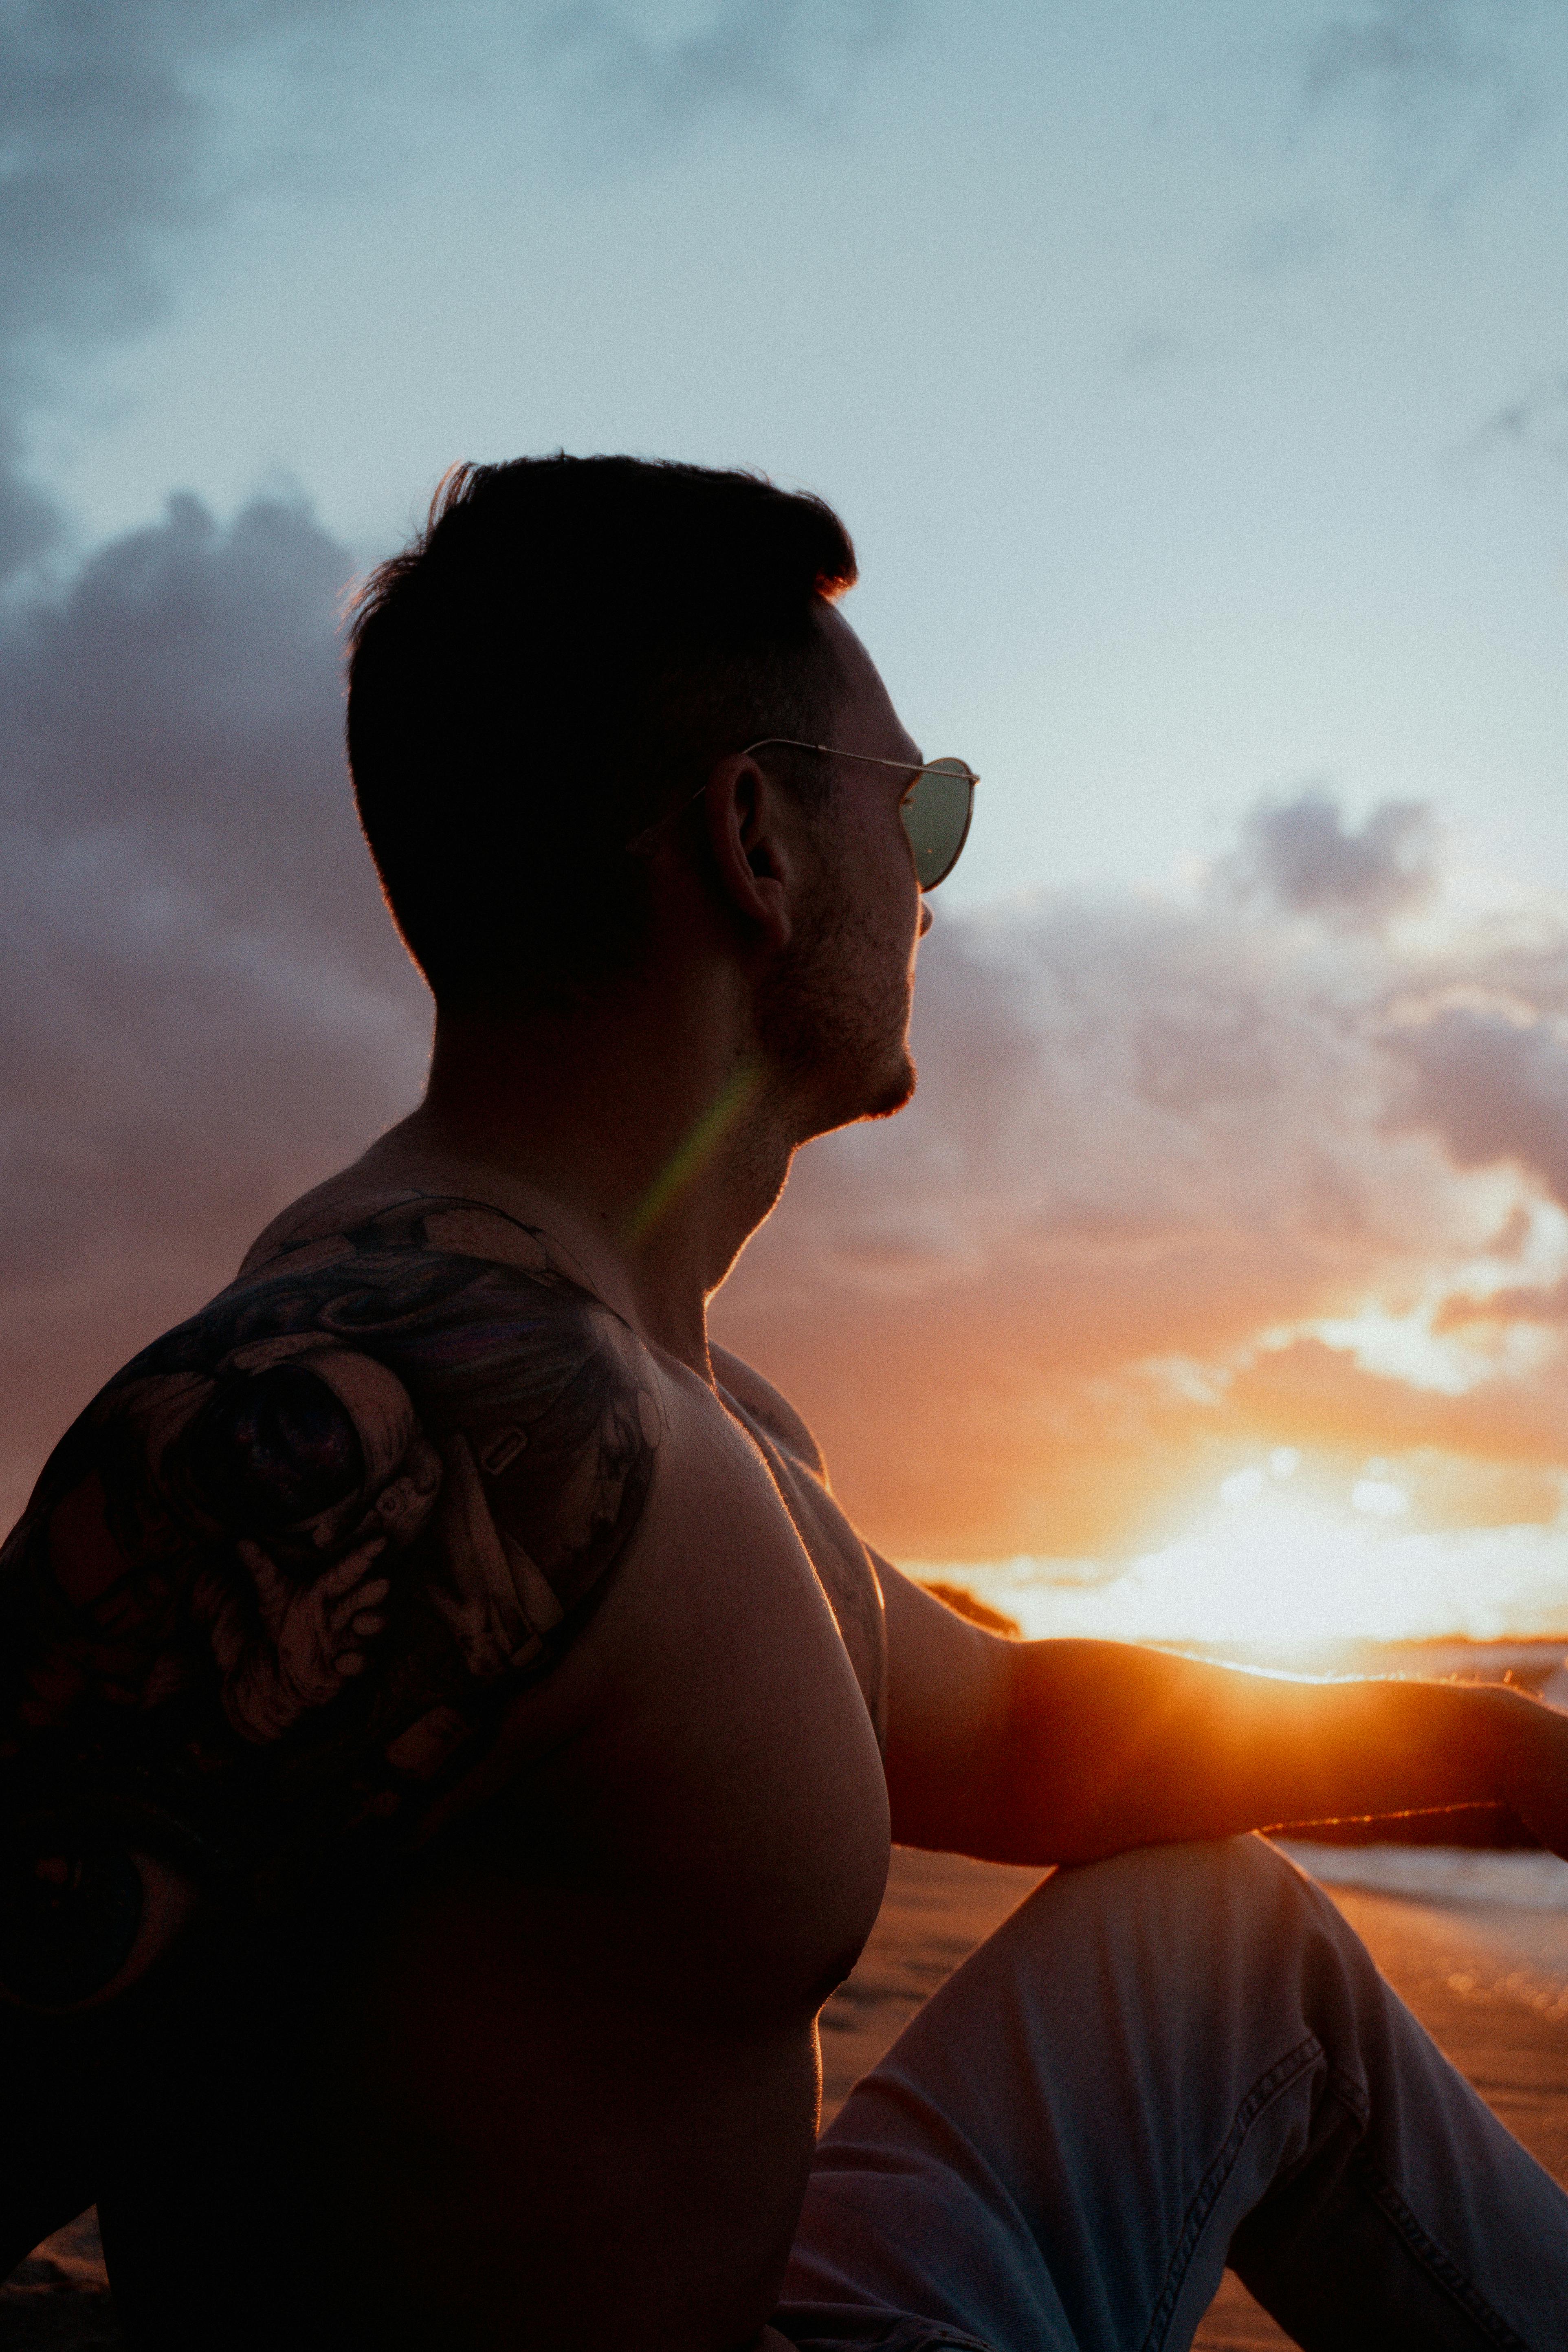 Man in Sunglasses Showing Tattoos on Fingers · Free Stock Photo